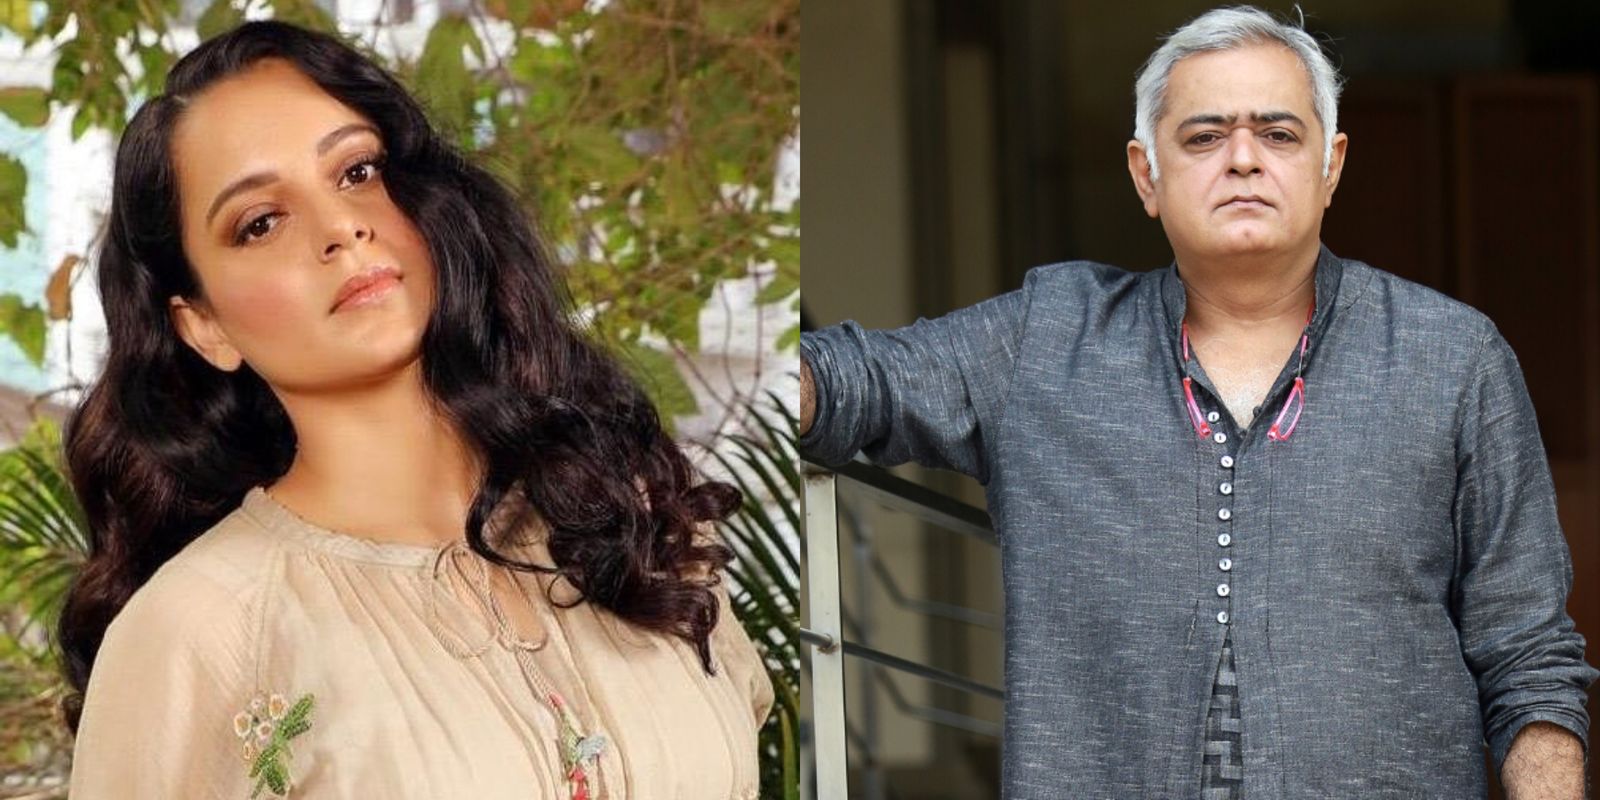 After Kangana Ranaut Talks Of Bollywood 'Drug Parties', Hansal Mehta Says ‘It Is Most Unfair Generalisation’ About The Industry